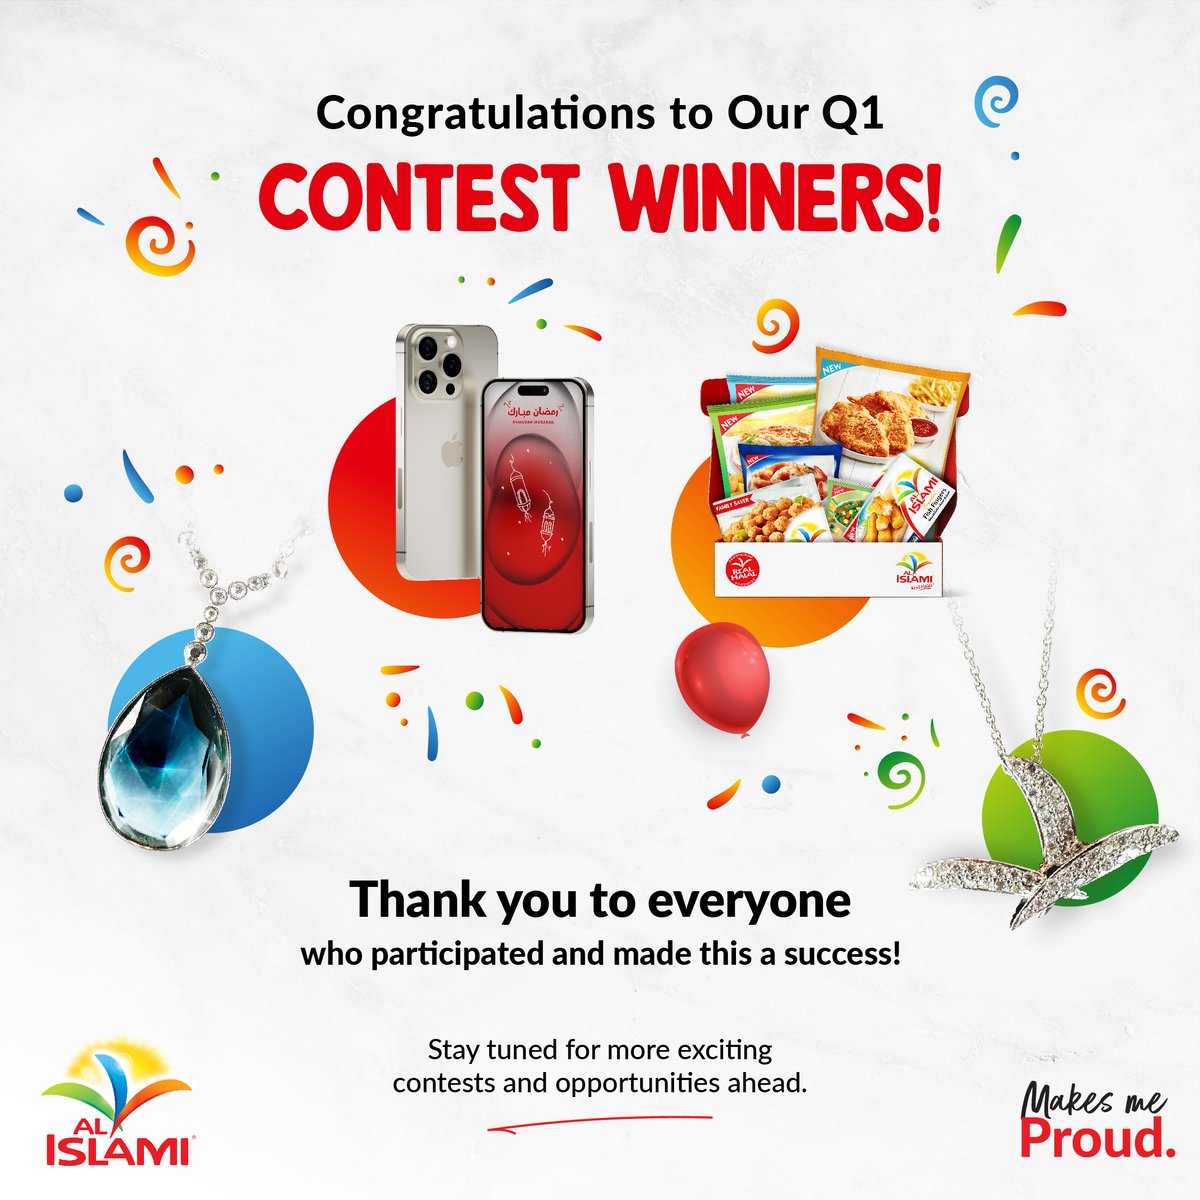 Congratulations to our Q1 contest winners! Let's celebrate their success and look forward to more exciting opportunities ahead. Stay tuned for your chance to win with Al Islami!

#MakesMeProud #Winners #Iphone #Gems #Hampers #AlIslamiFoods #Contests #SharingFood #PremiumFood